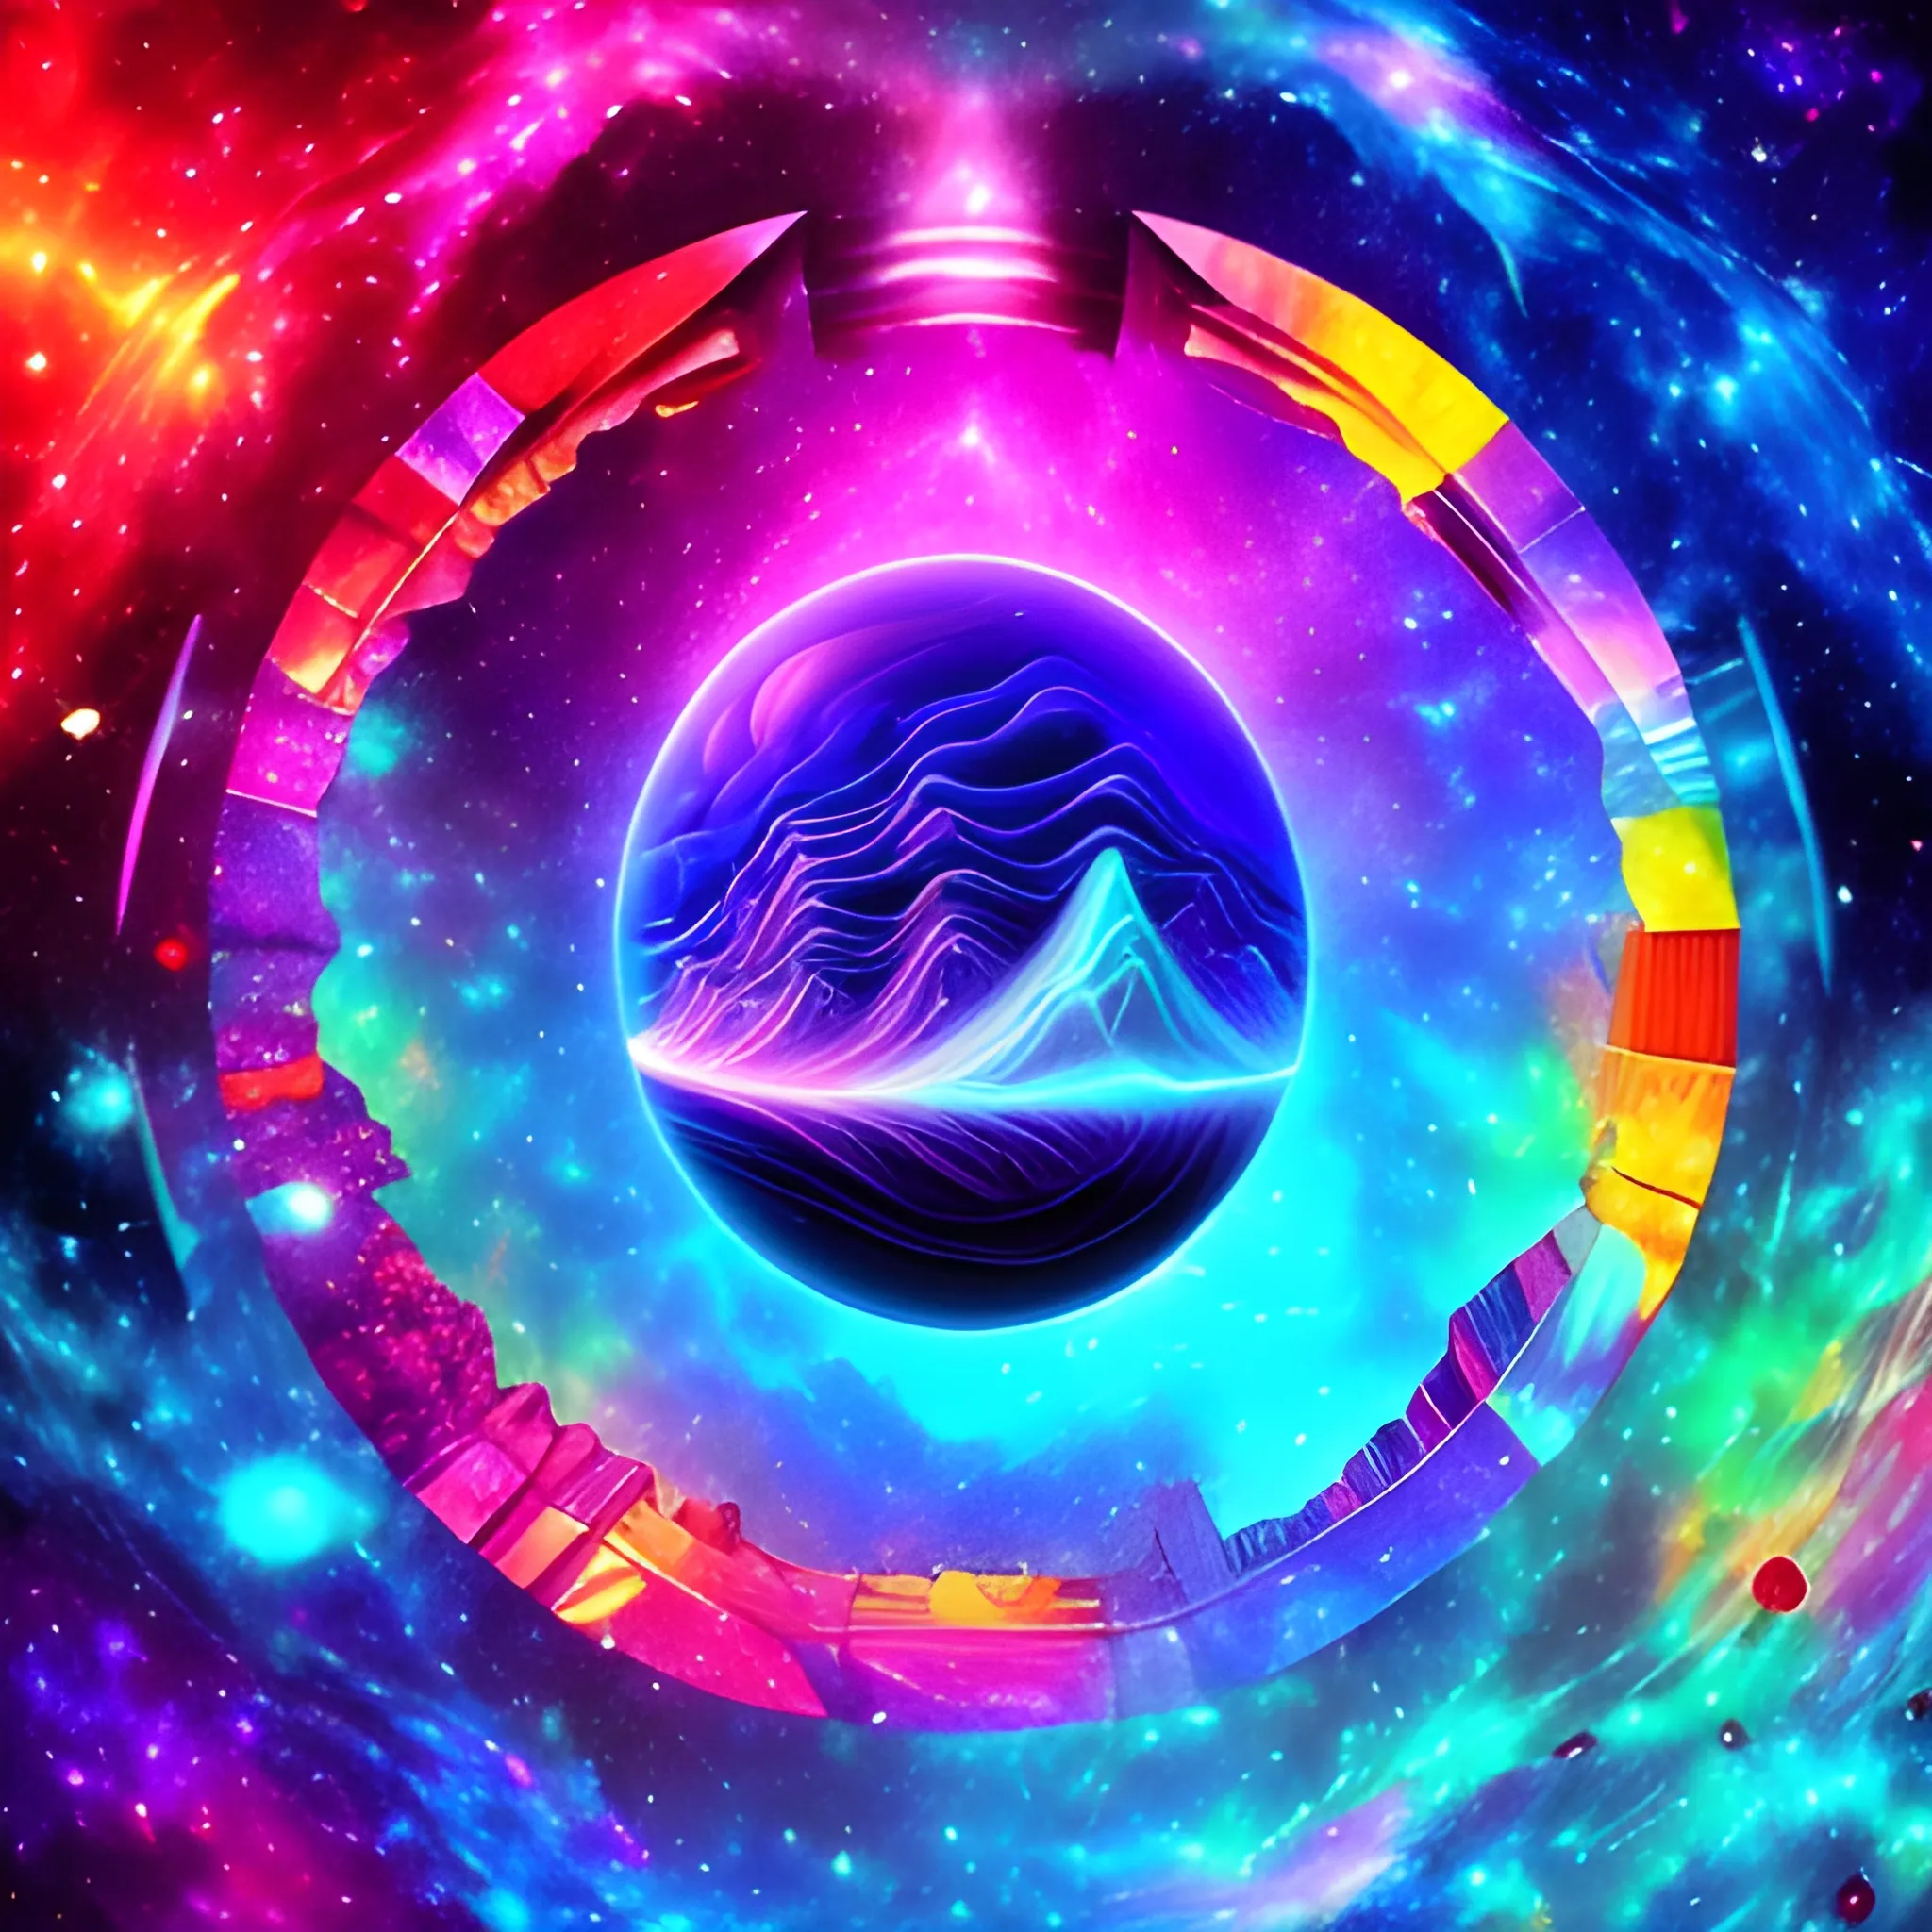 , Trippy, mount olympus
, music, colorful, universe
